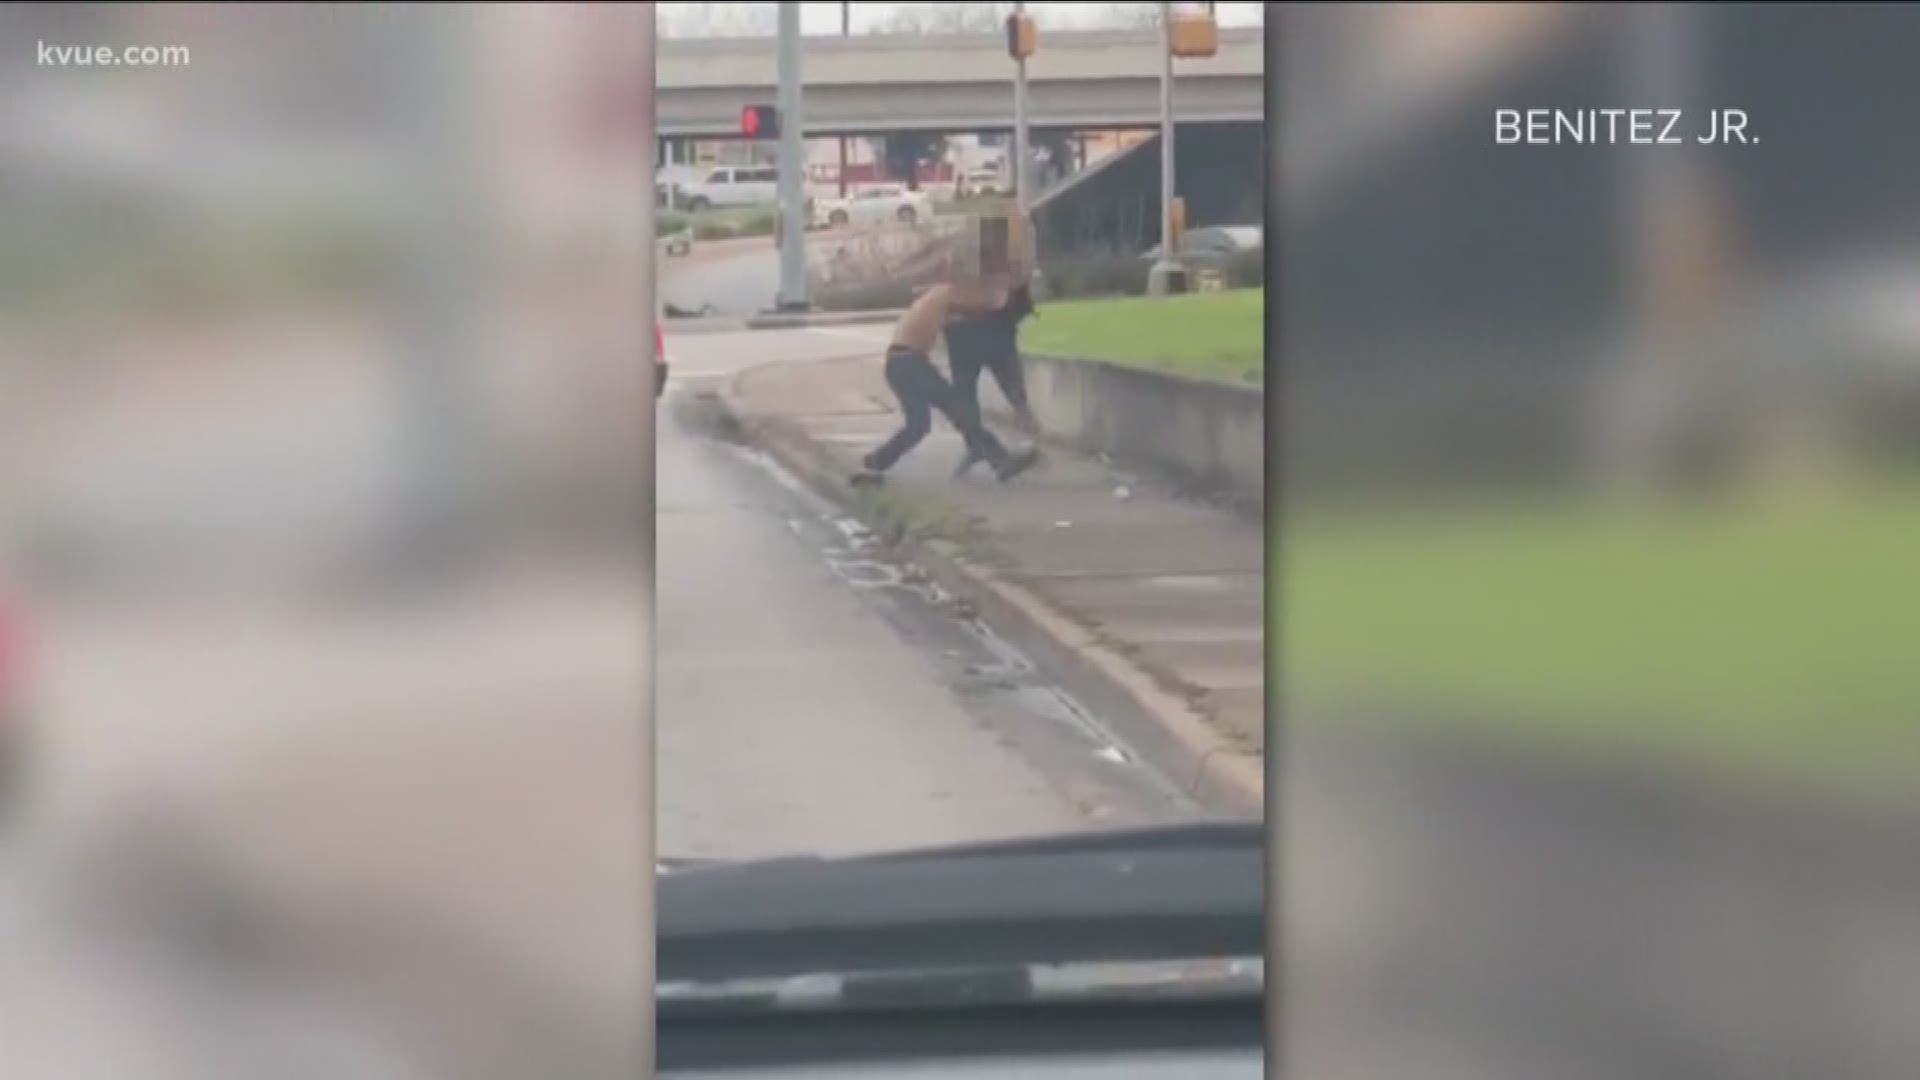 A driver recorded video of two men fighting on the side of the road near Rundberg and the I-35 frontage road. And that wasn't the only road rage incident caught on camera this week.